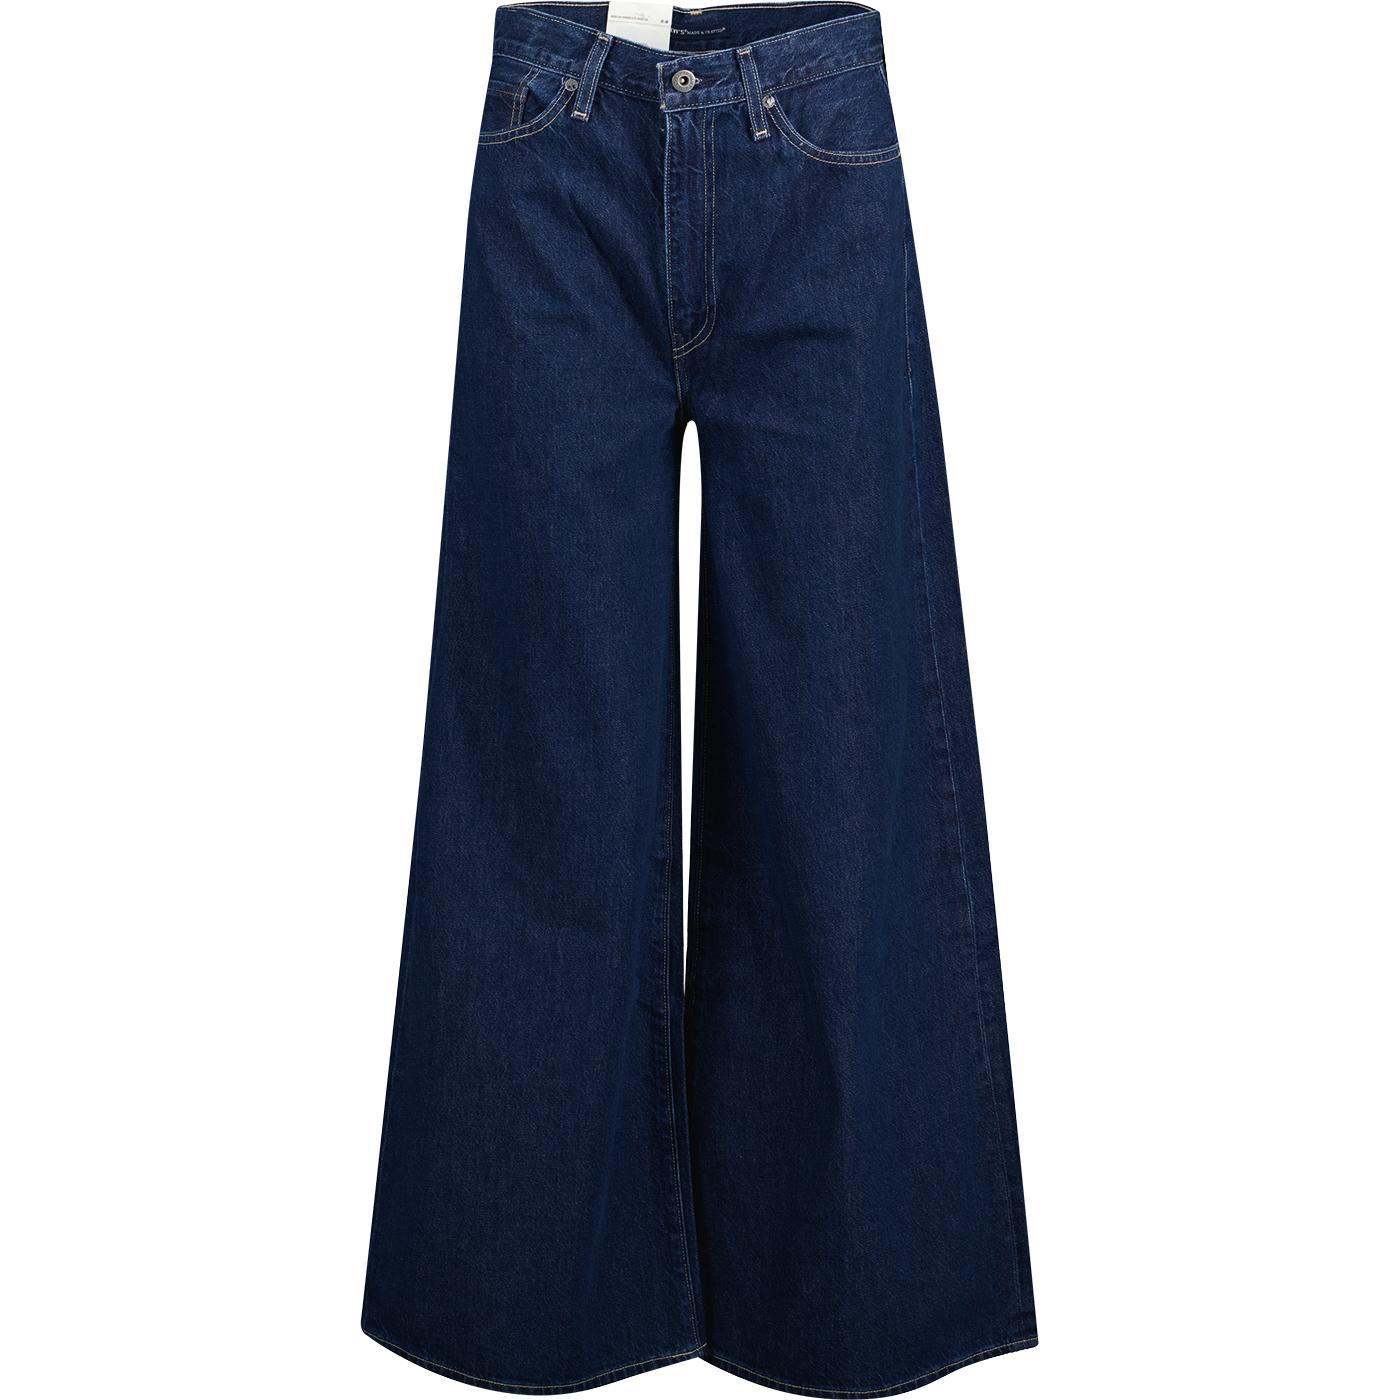 LEVI'S® MADE & CRAFTED® FULL FLARE JEANS